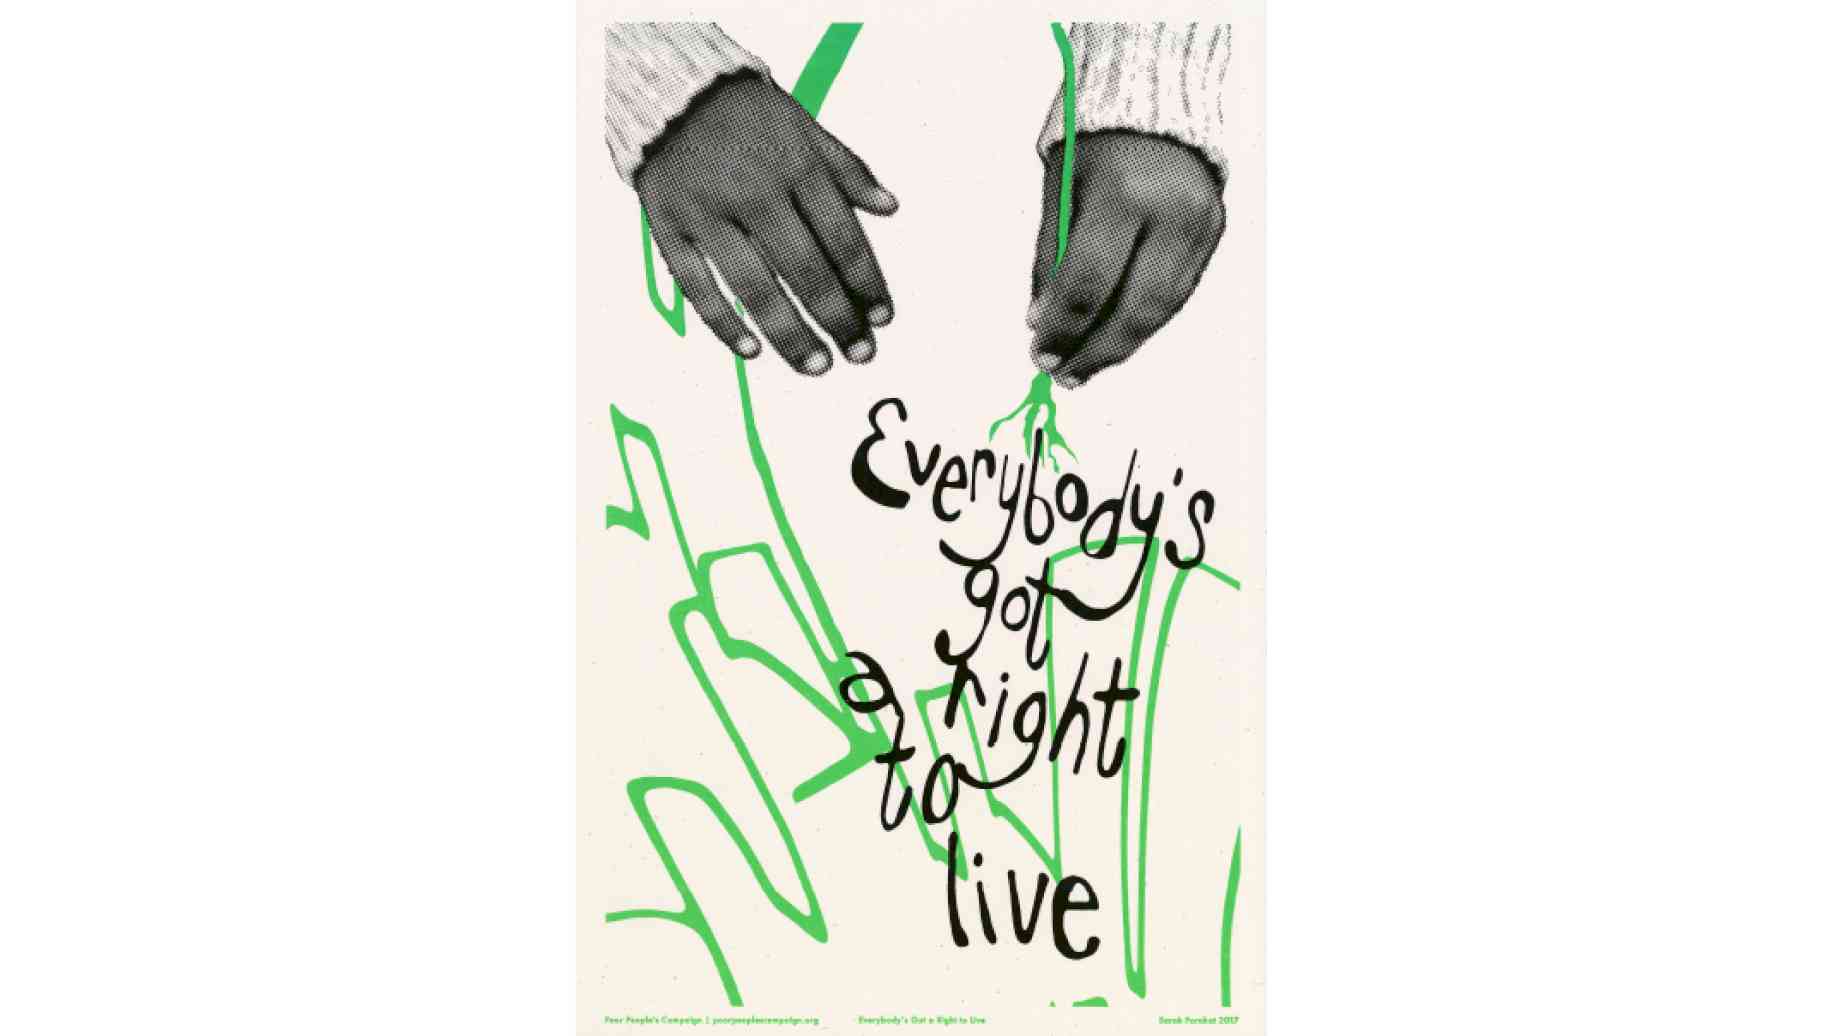 Grainy black and white hands with wool sweater writs tug downward on the end of a drawn green line, which forms shapes below like buildings or plants. Scrawled atop the line in black are words that read "Everybody